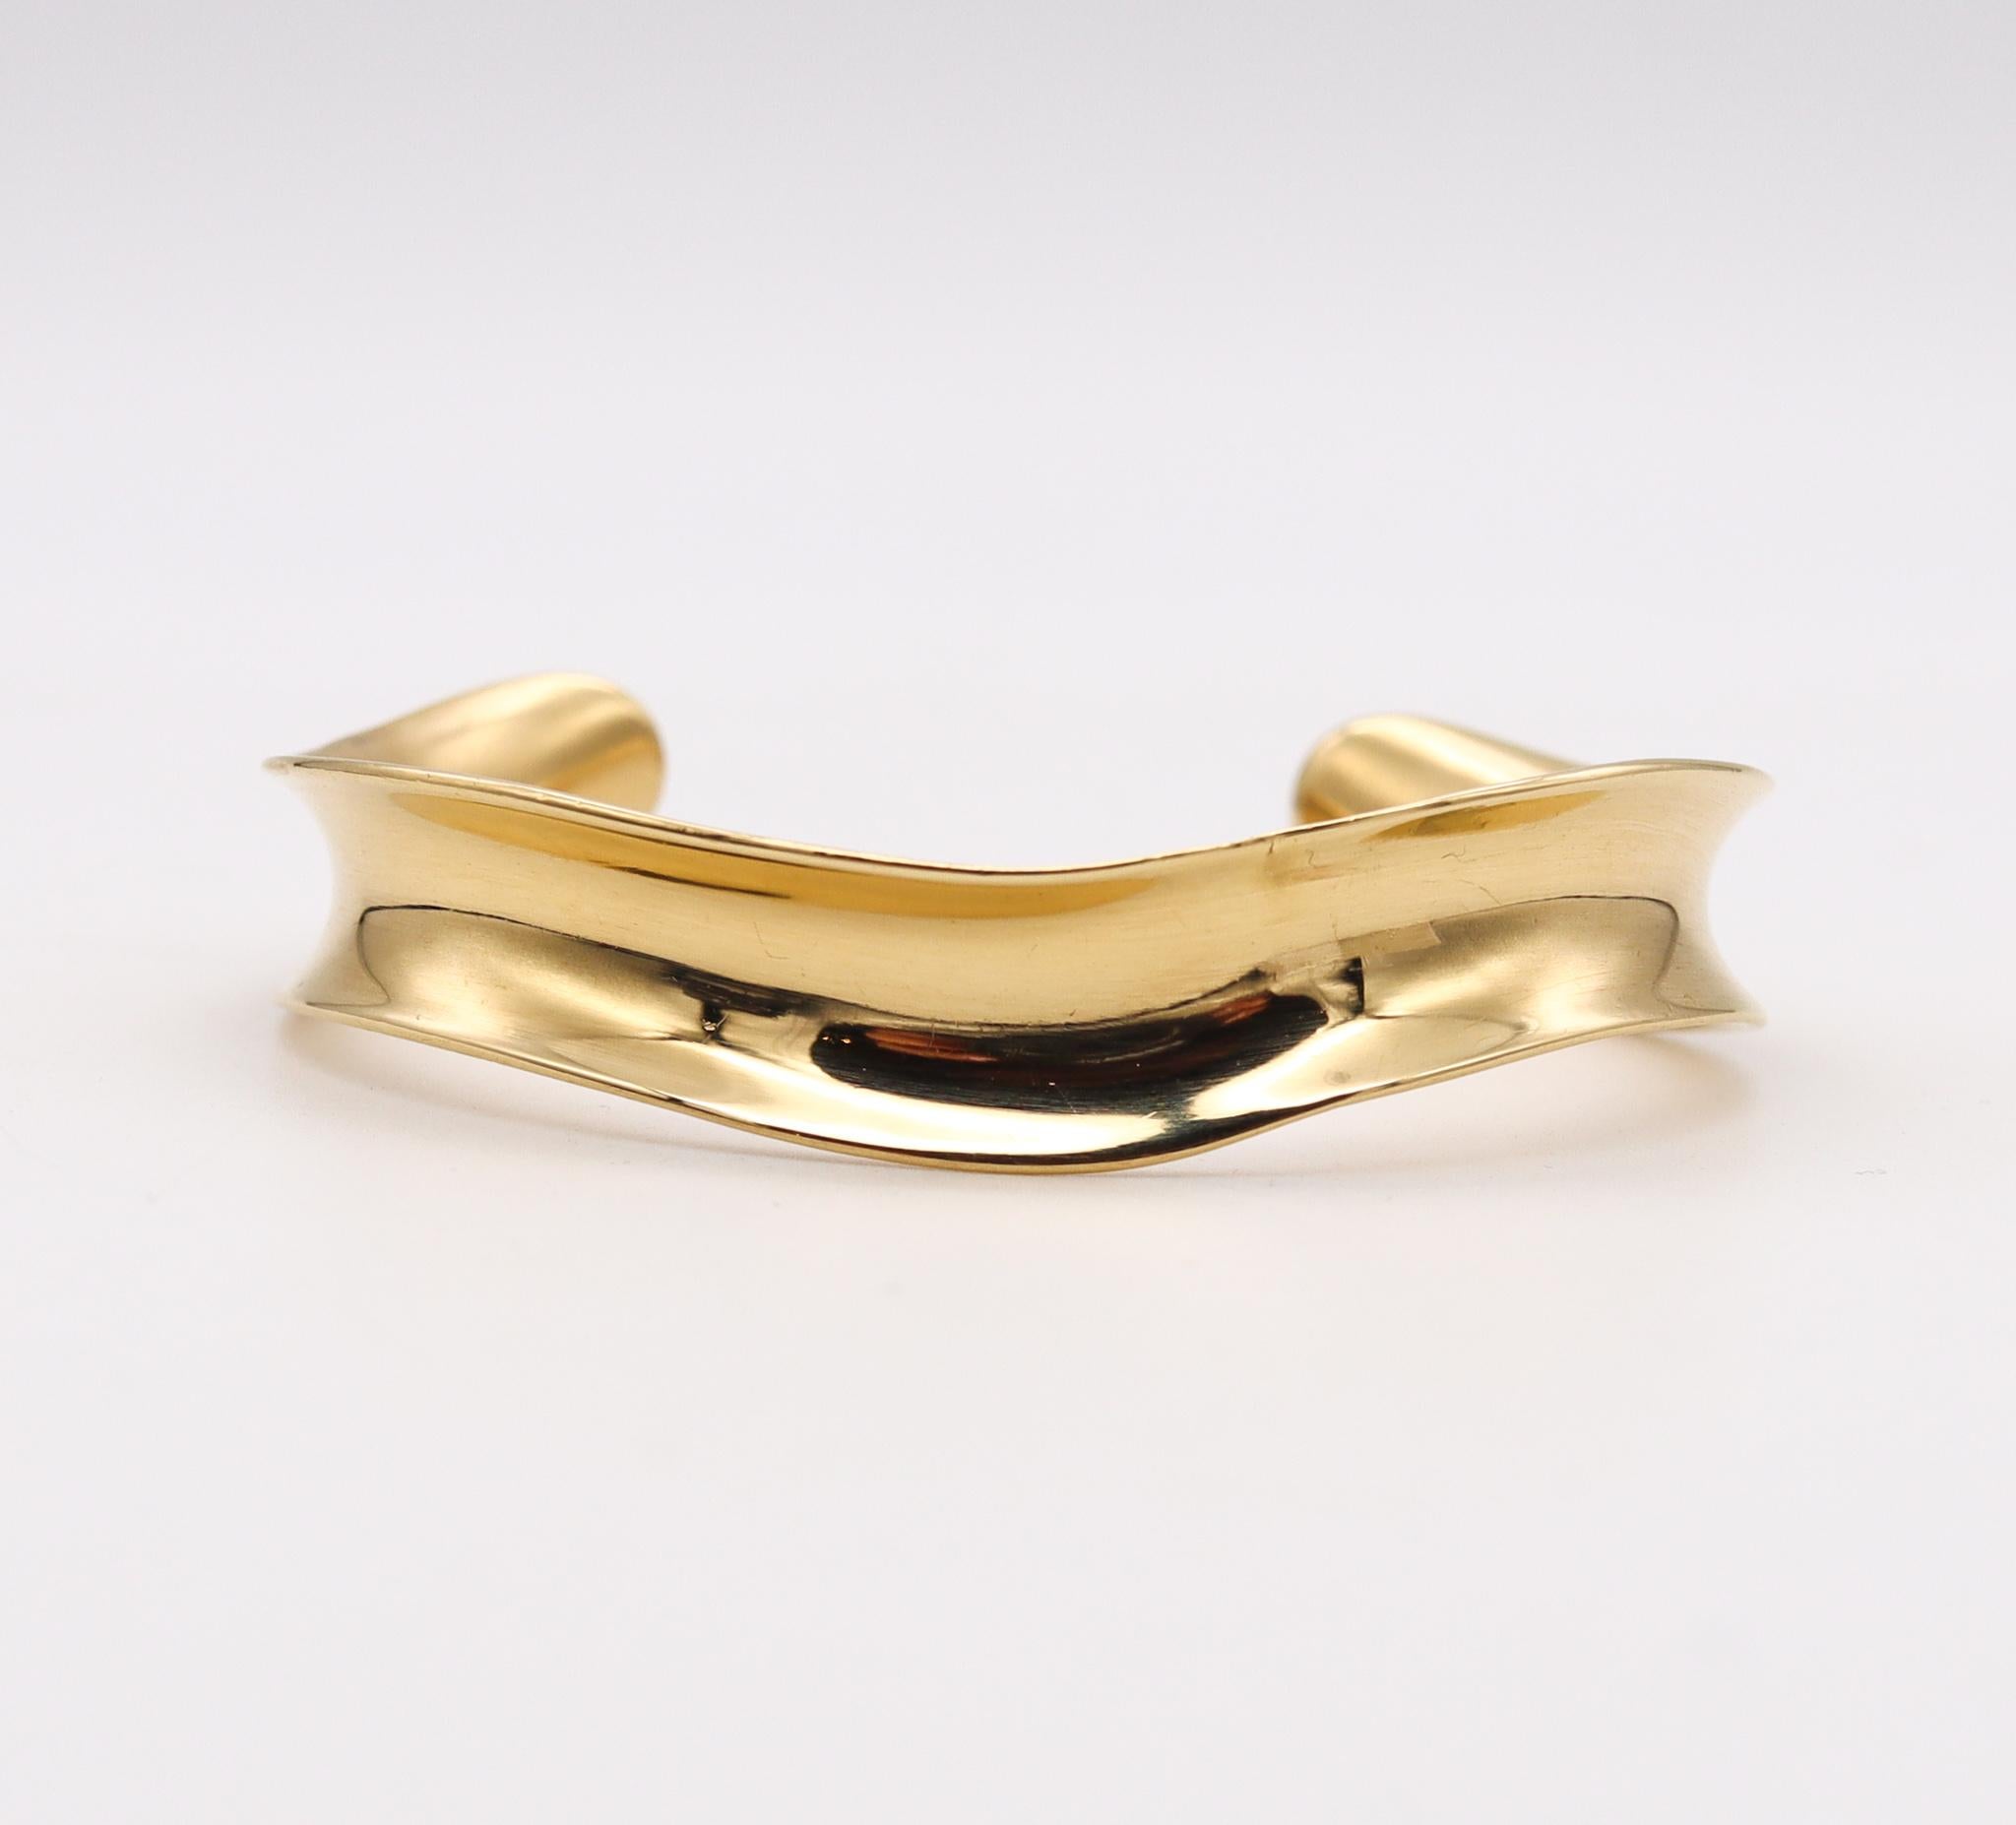 Modernist Tiffany Co 1980 by Angela Cummings Wave Cuff Bracelet in Solid 18Kt Yellow Gold